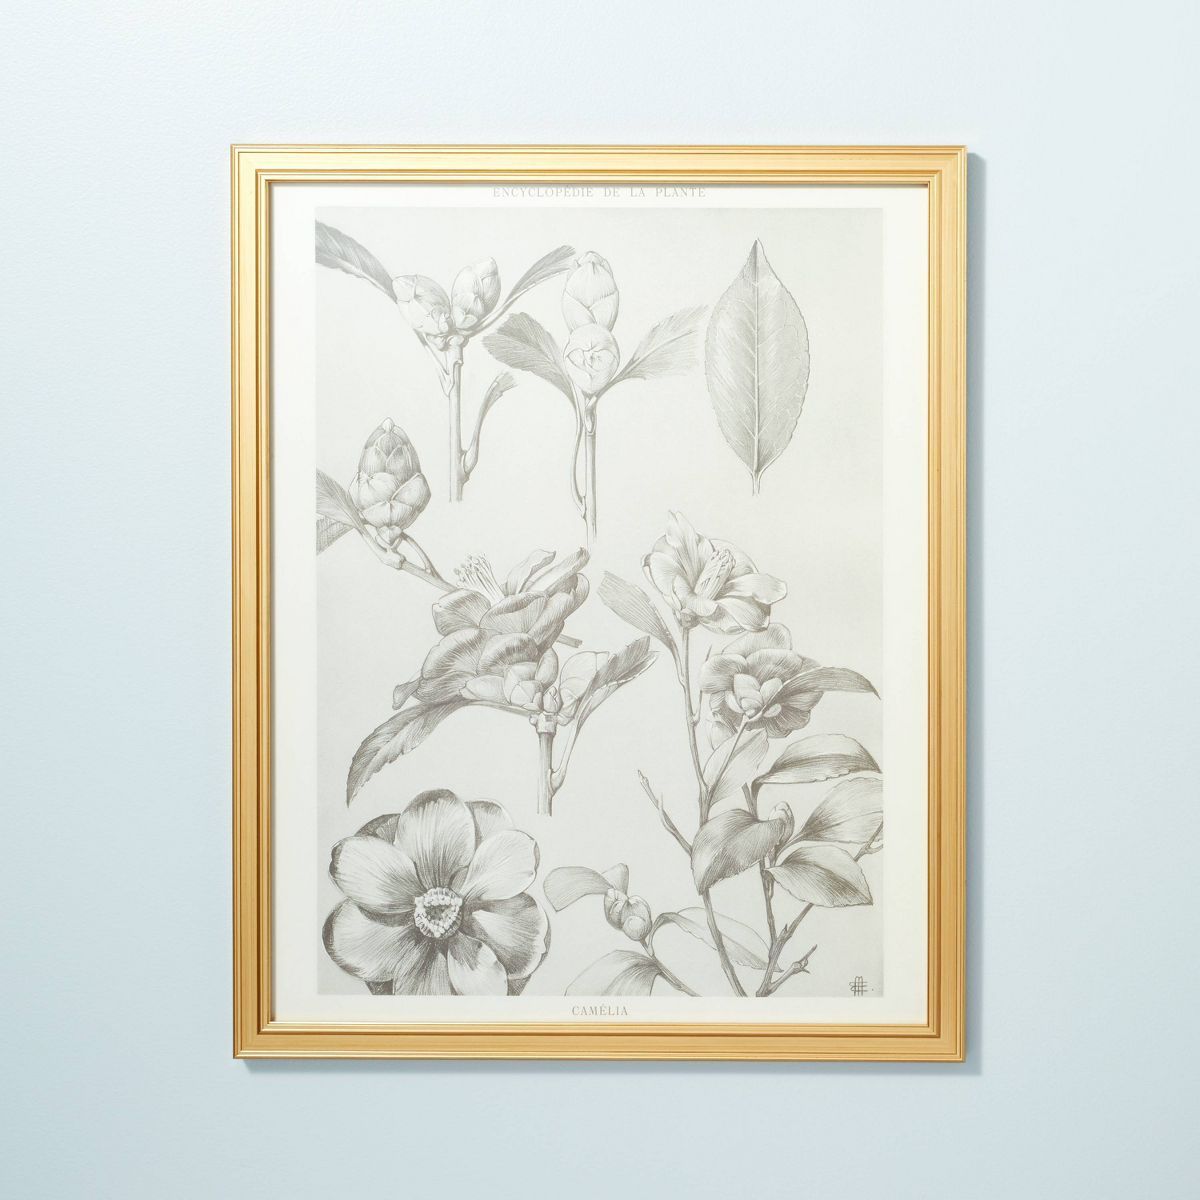 24"x30" Botanical Sketch Framed Wall Art - Hearth & Hand™ with Magnolia | Target